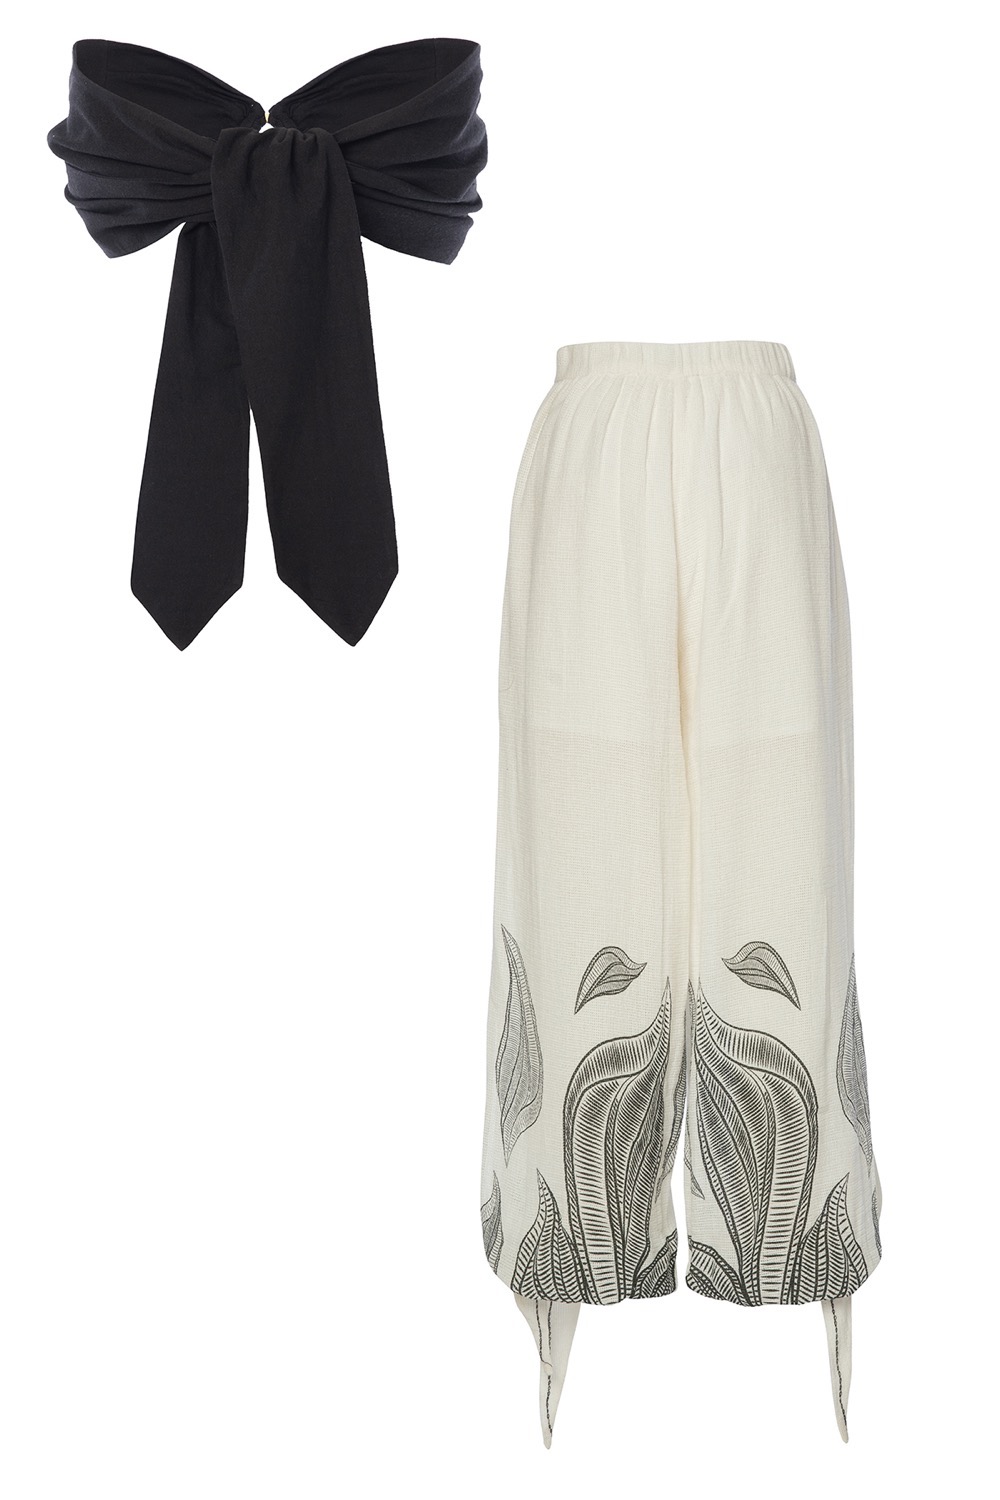 Hegra Summer Trousers, Linen Side Slits, Ankle-tie Baggy Trousers